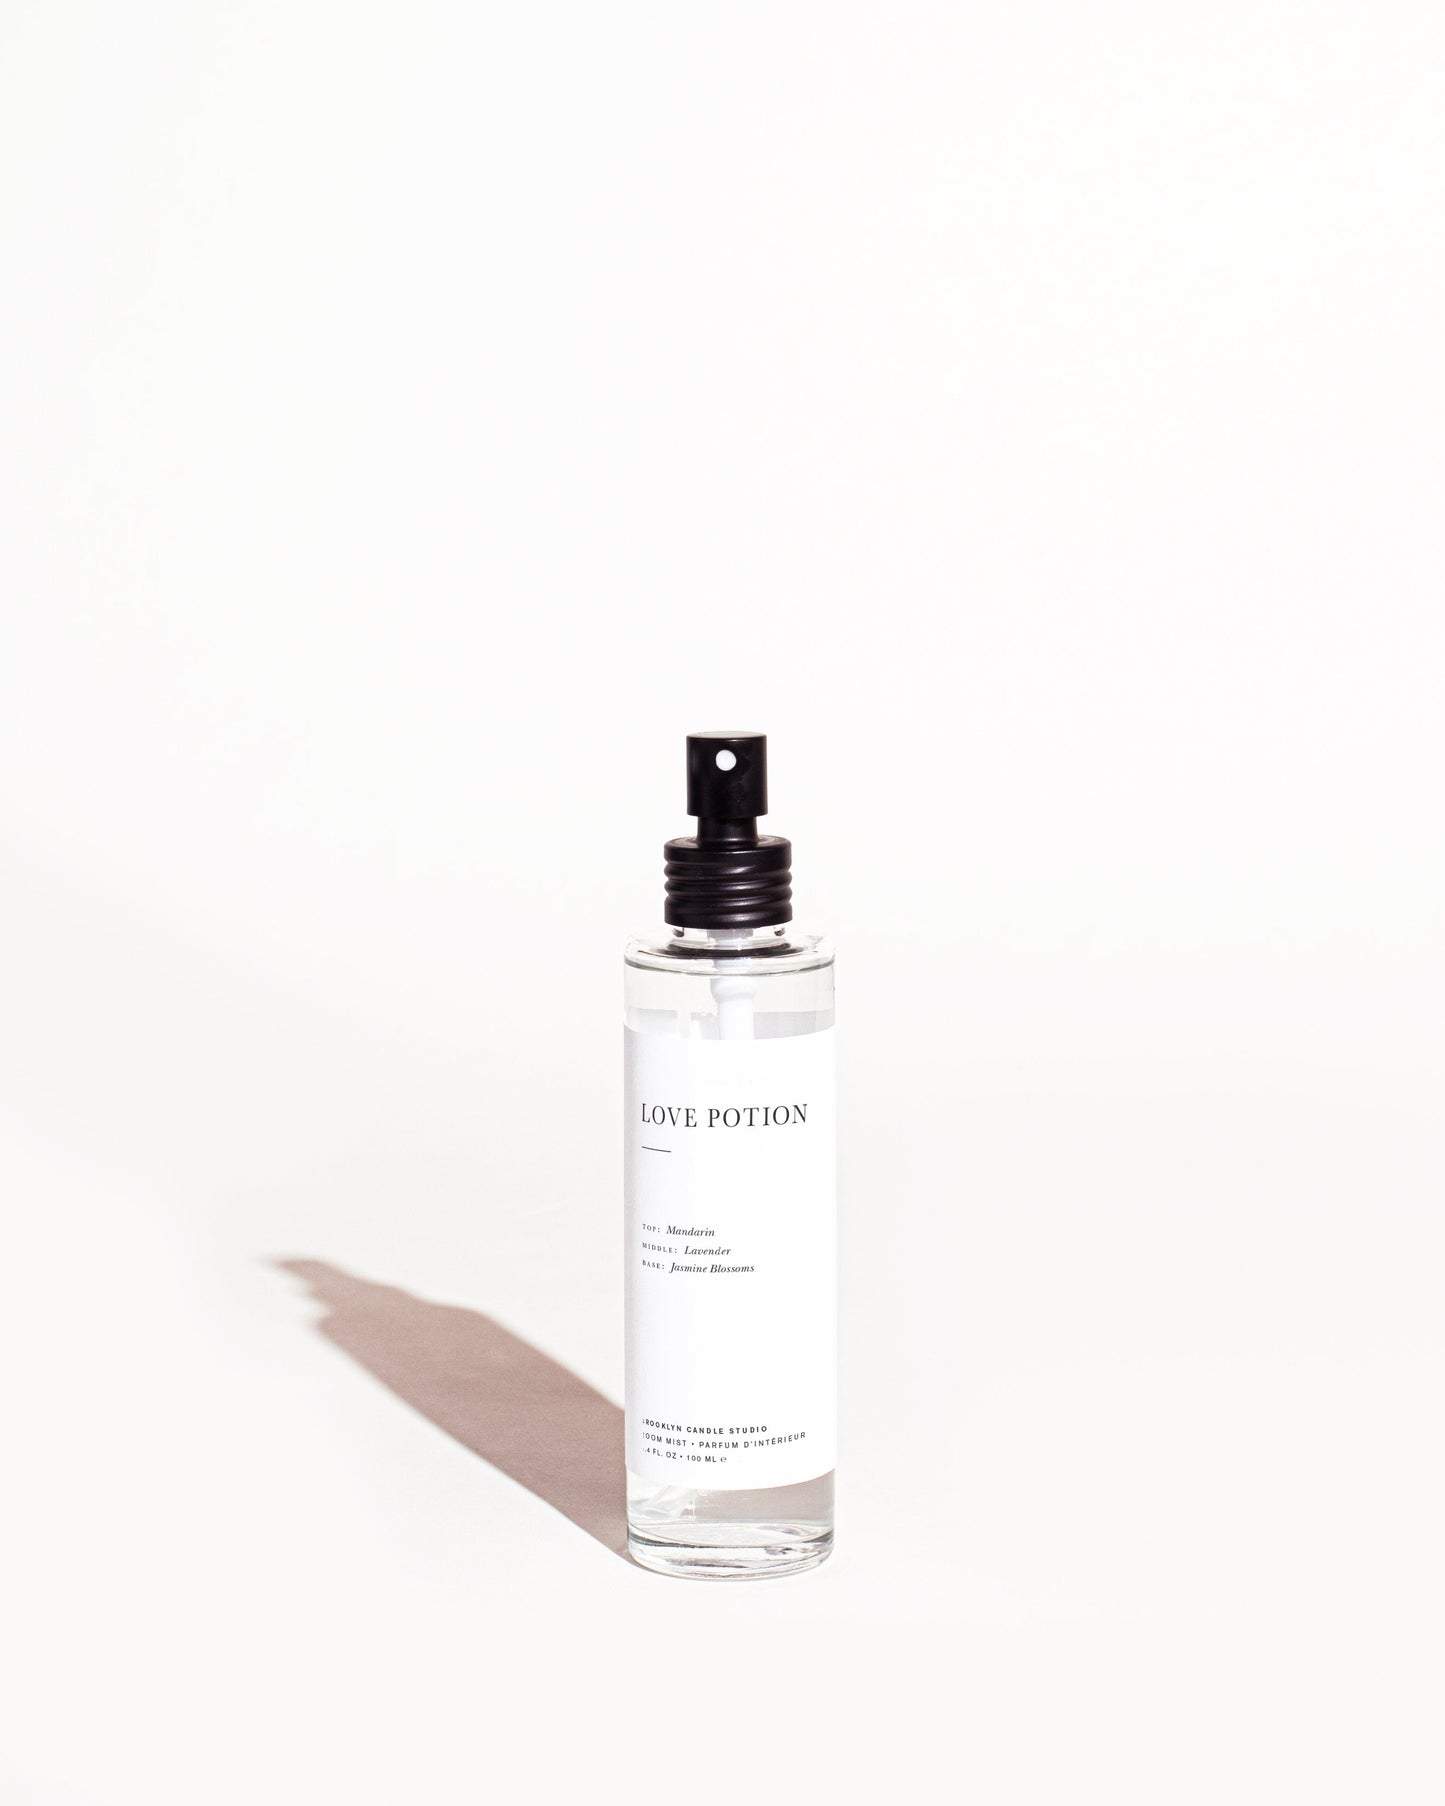 Love Potion Room Mist by Brooklyn Candle Studio